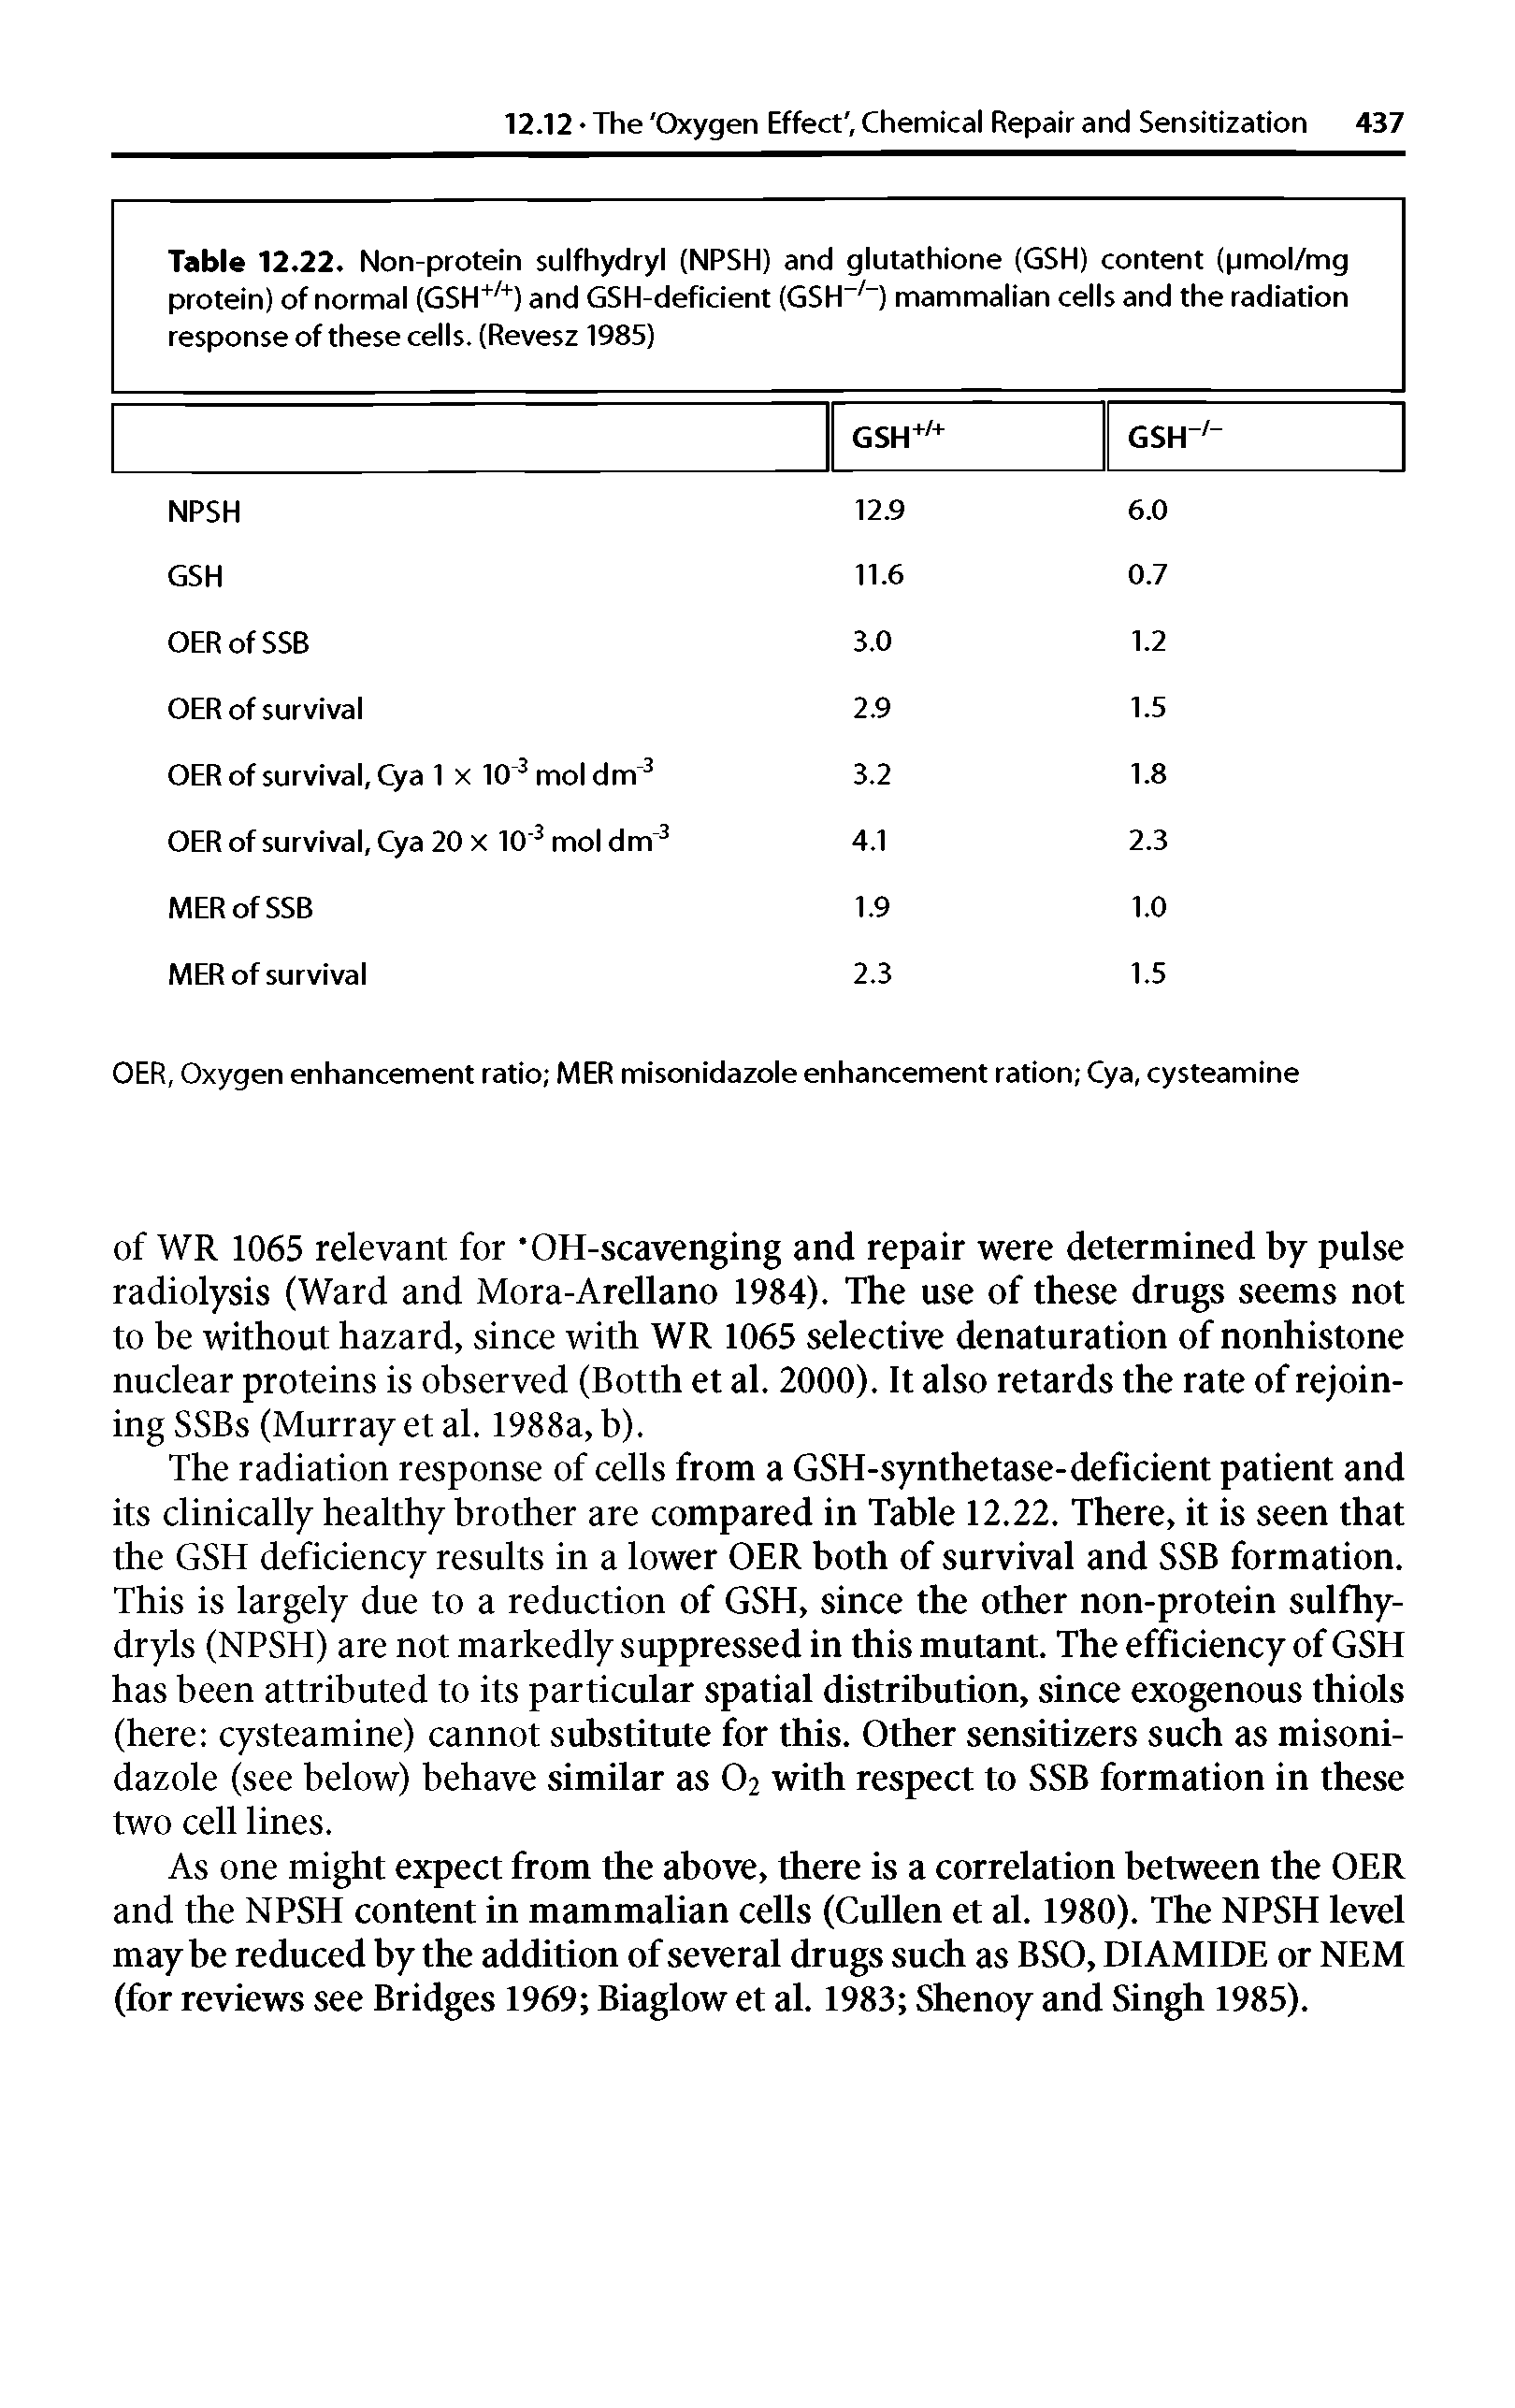 Table 12.22. Non-protein sulfhydryl (NPSH) and glutathione (GSH) content (pmol/mg protein) of normal (GSH+/+) and GSH-deficient (GSH / ) mammalian cells and the radiation response of these cells. (Revesz 1985) ...